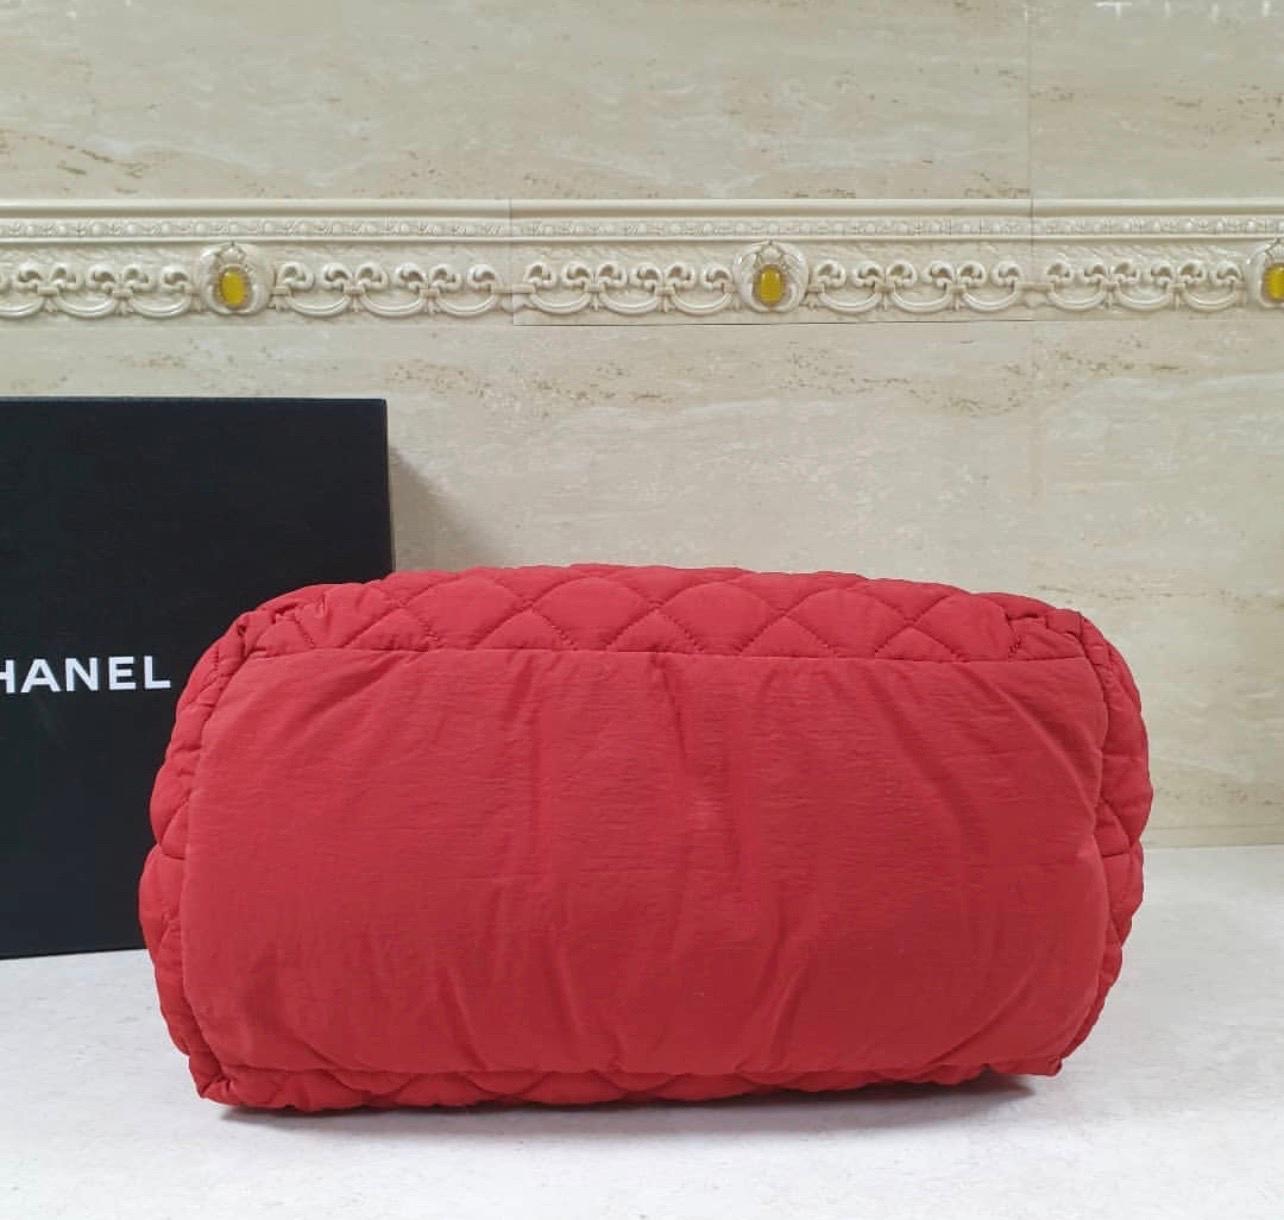 Chanel Red Nylon Coco Cocoon Bag In Good Condition For Sale In Krakow, PL